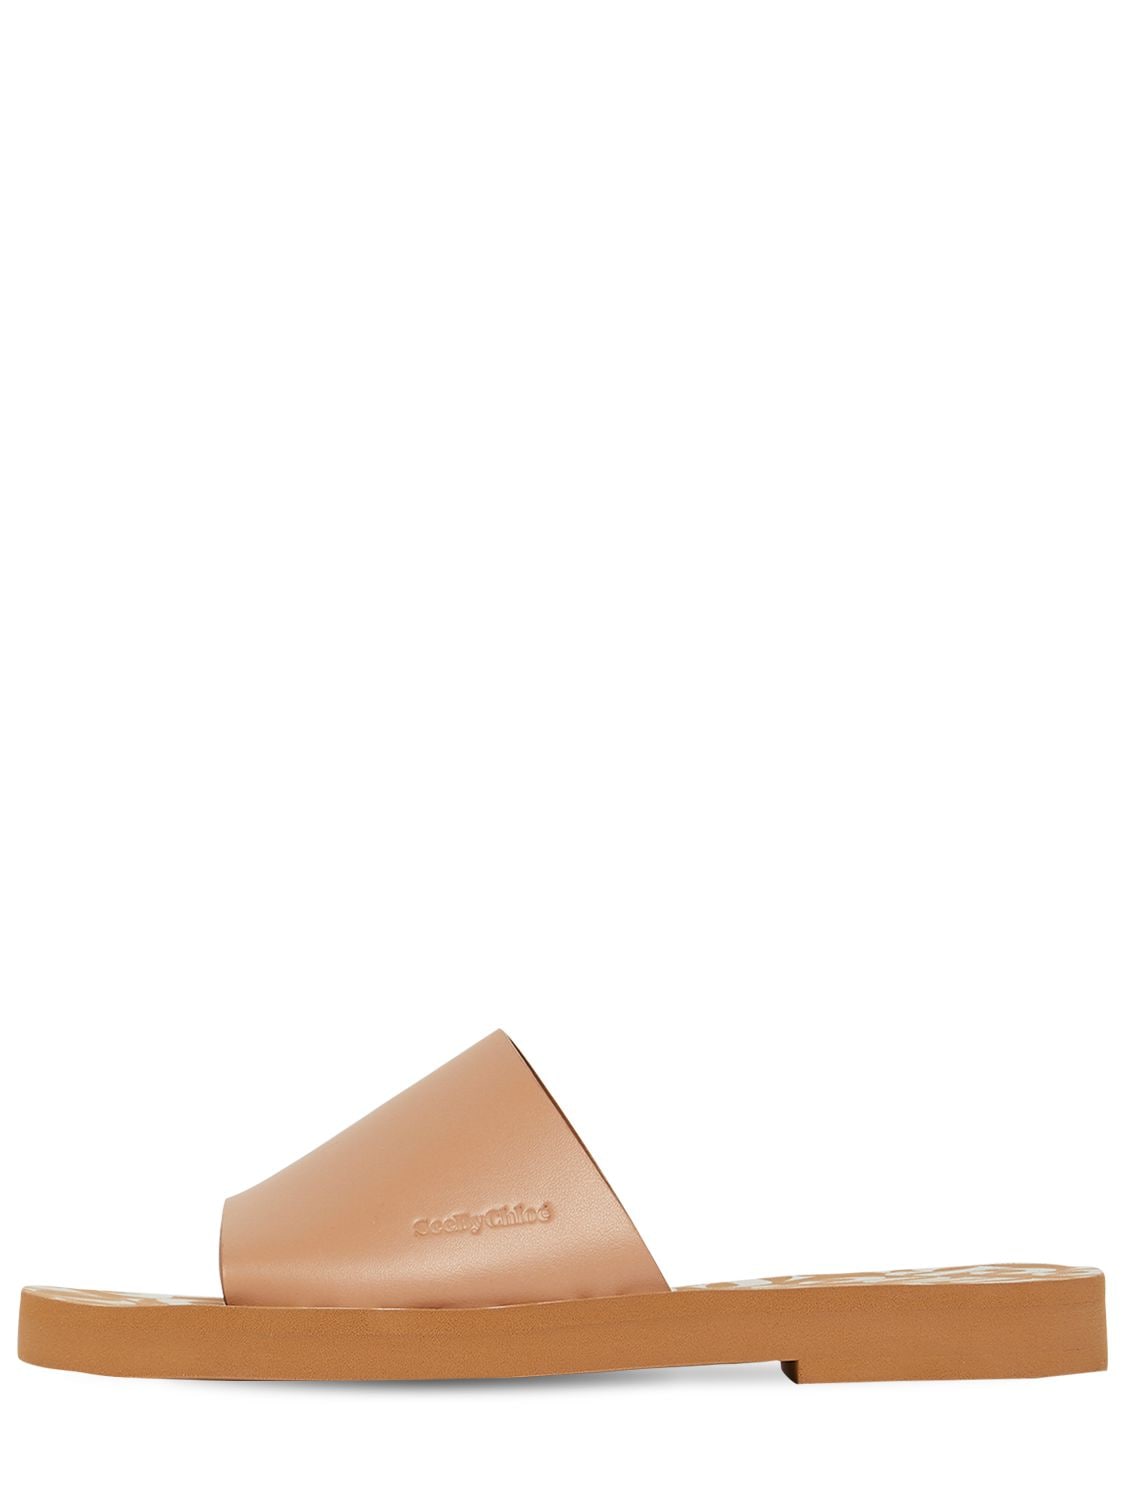 SEE BY CHLOÉ 10MM ESSIE LEATHER SLIDE SANDALS